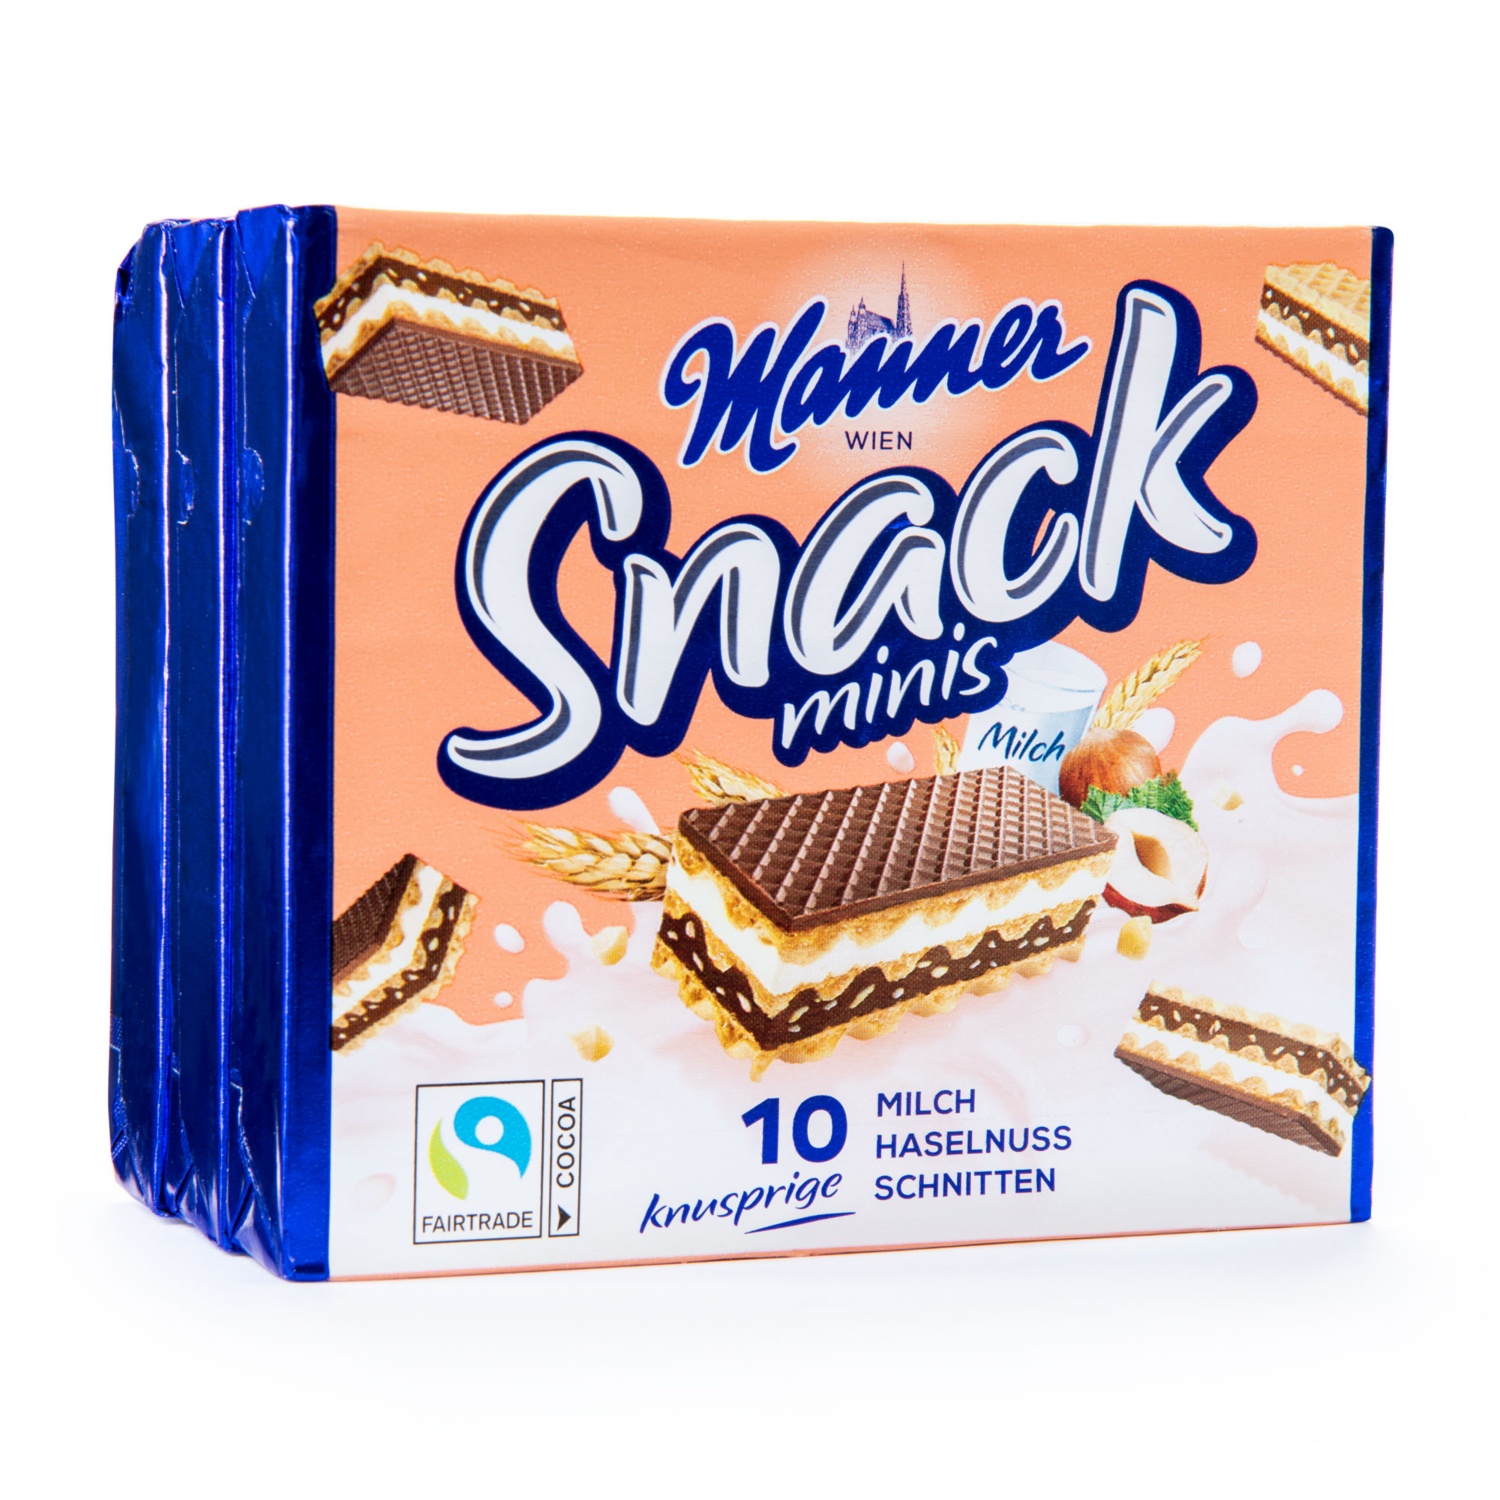 MANNERS Snack minis 3 x 75 g